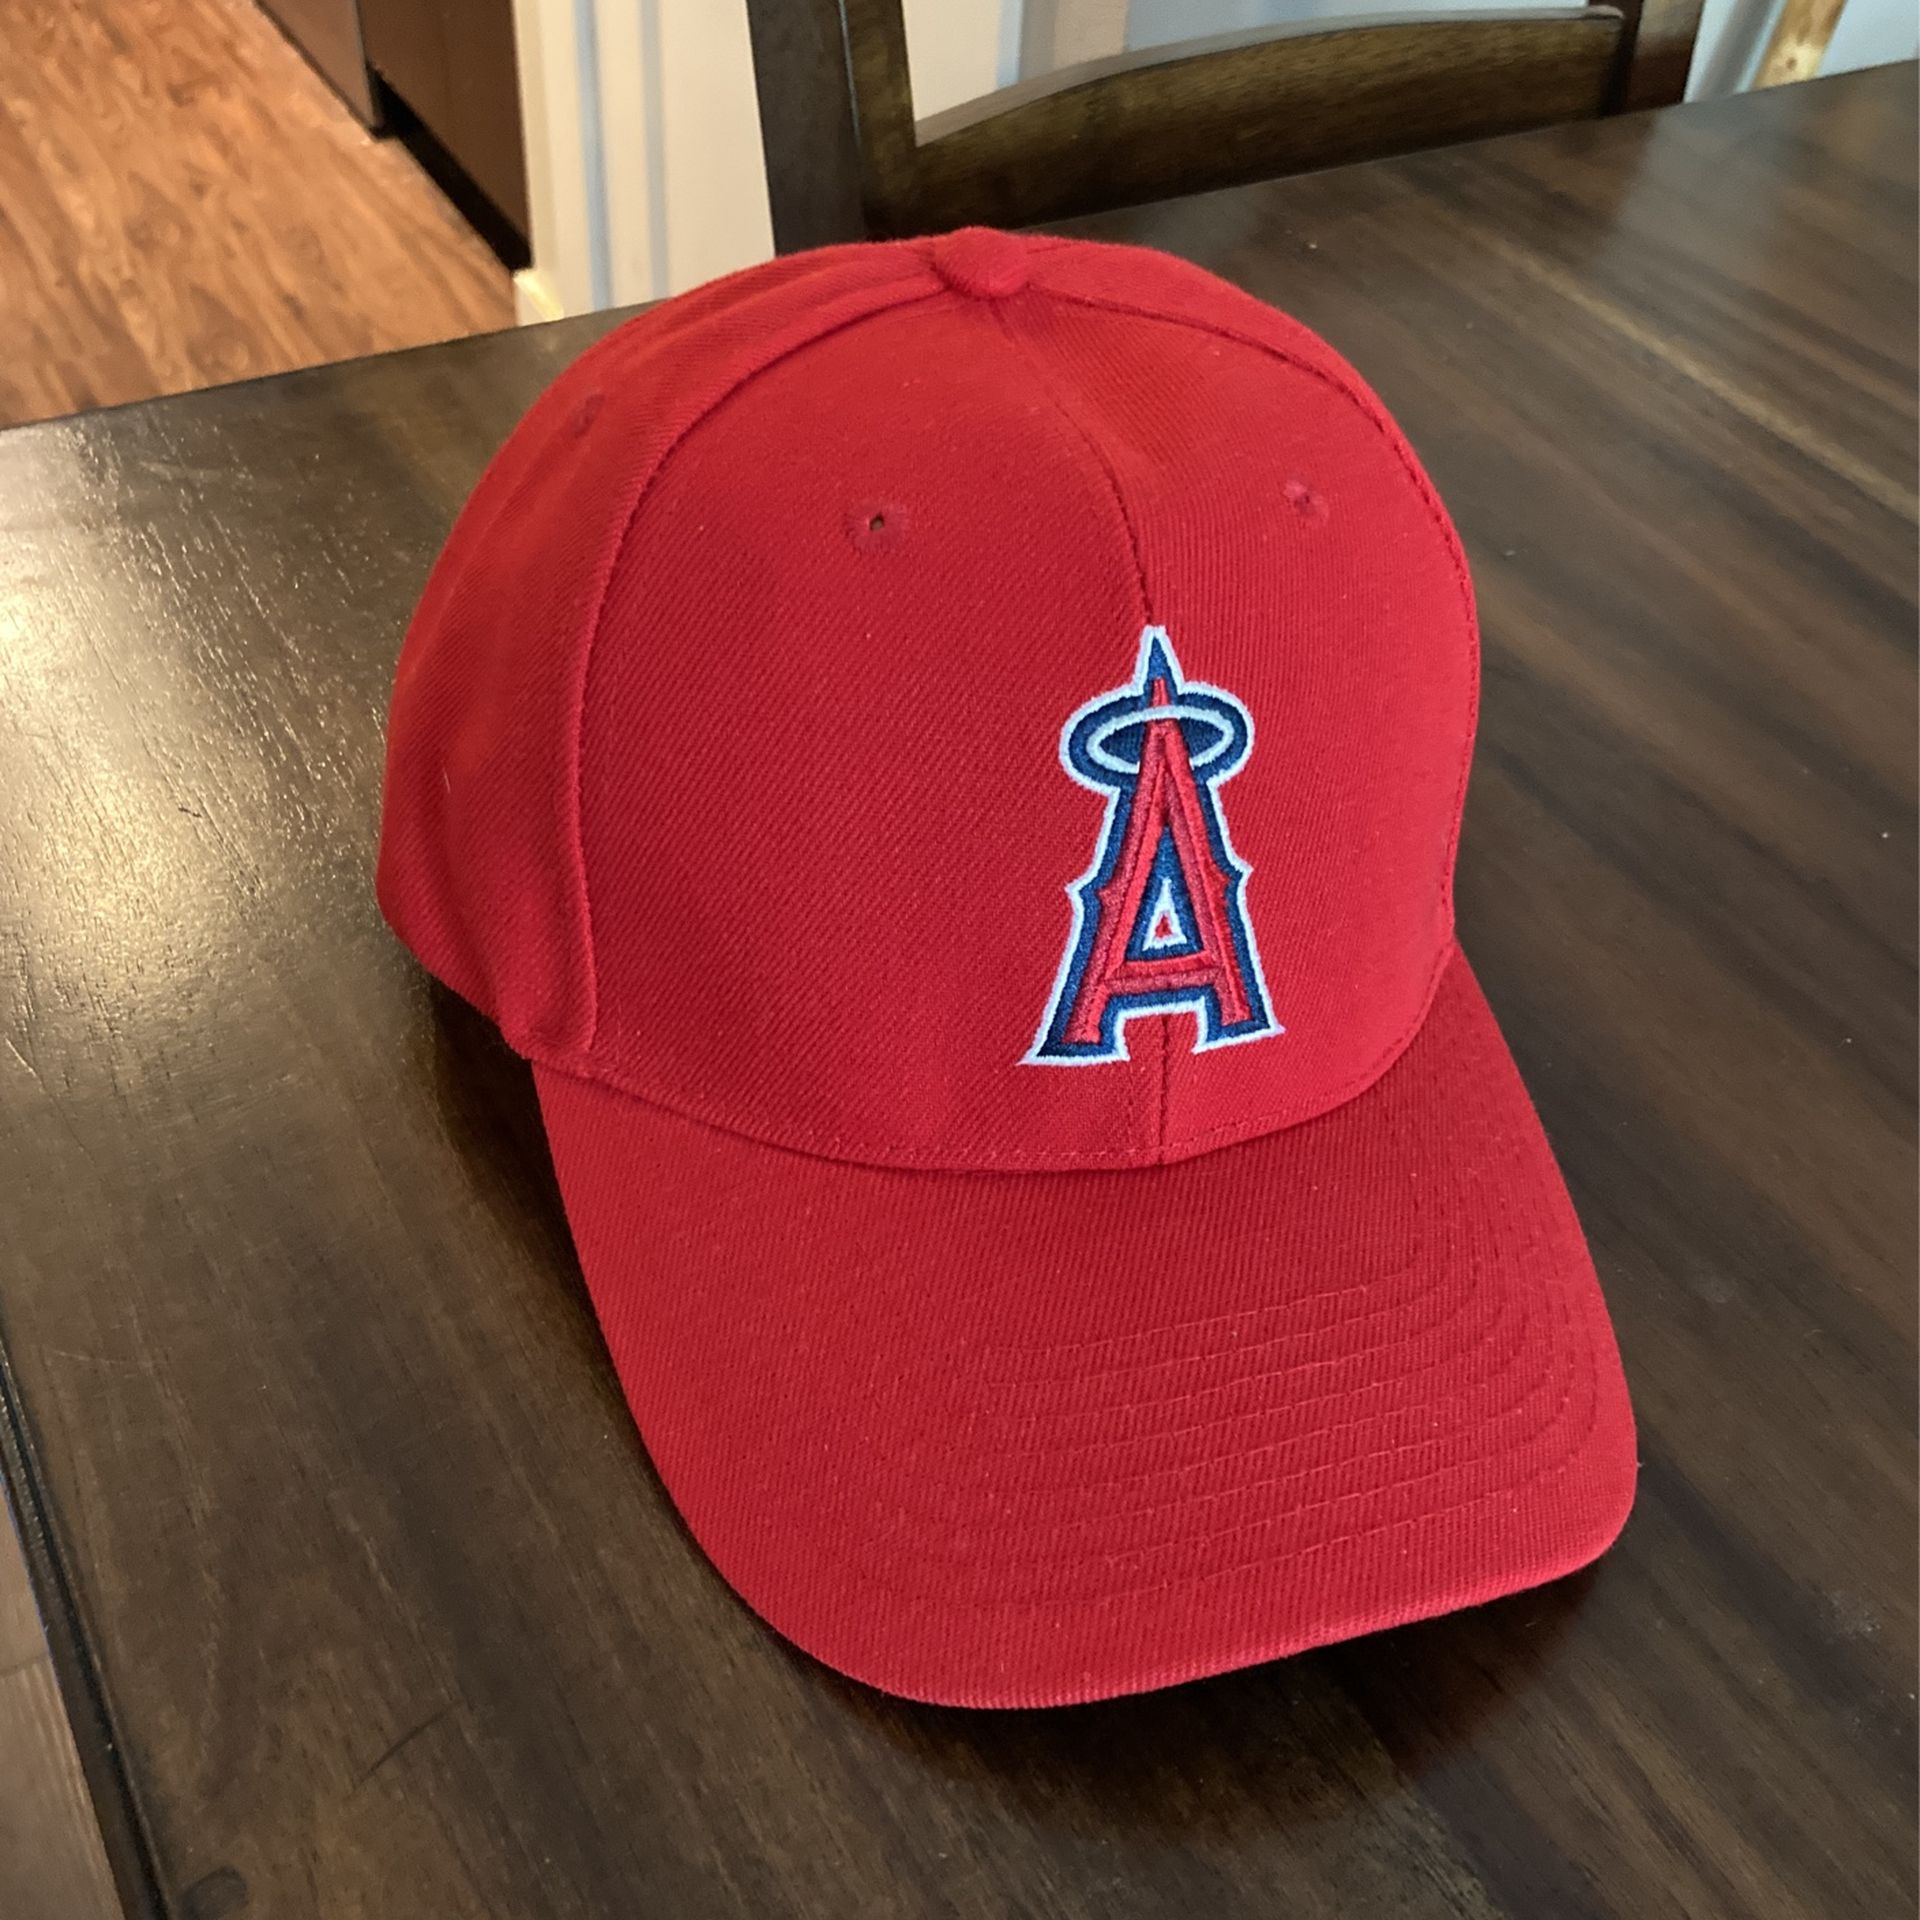 Anaheim Angels MLB Official Snapback Hat